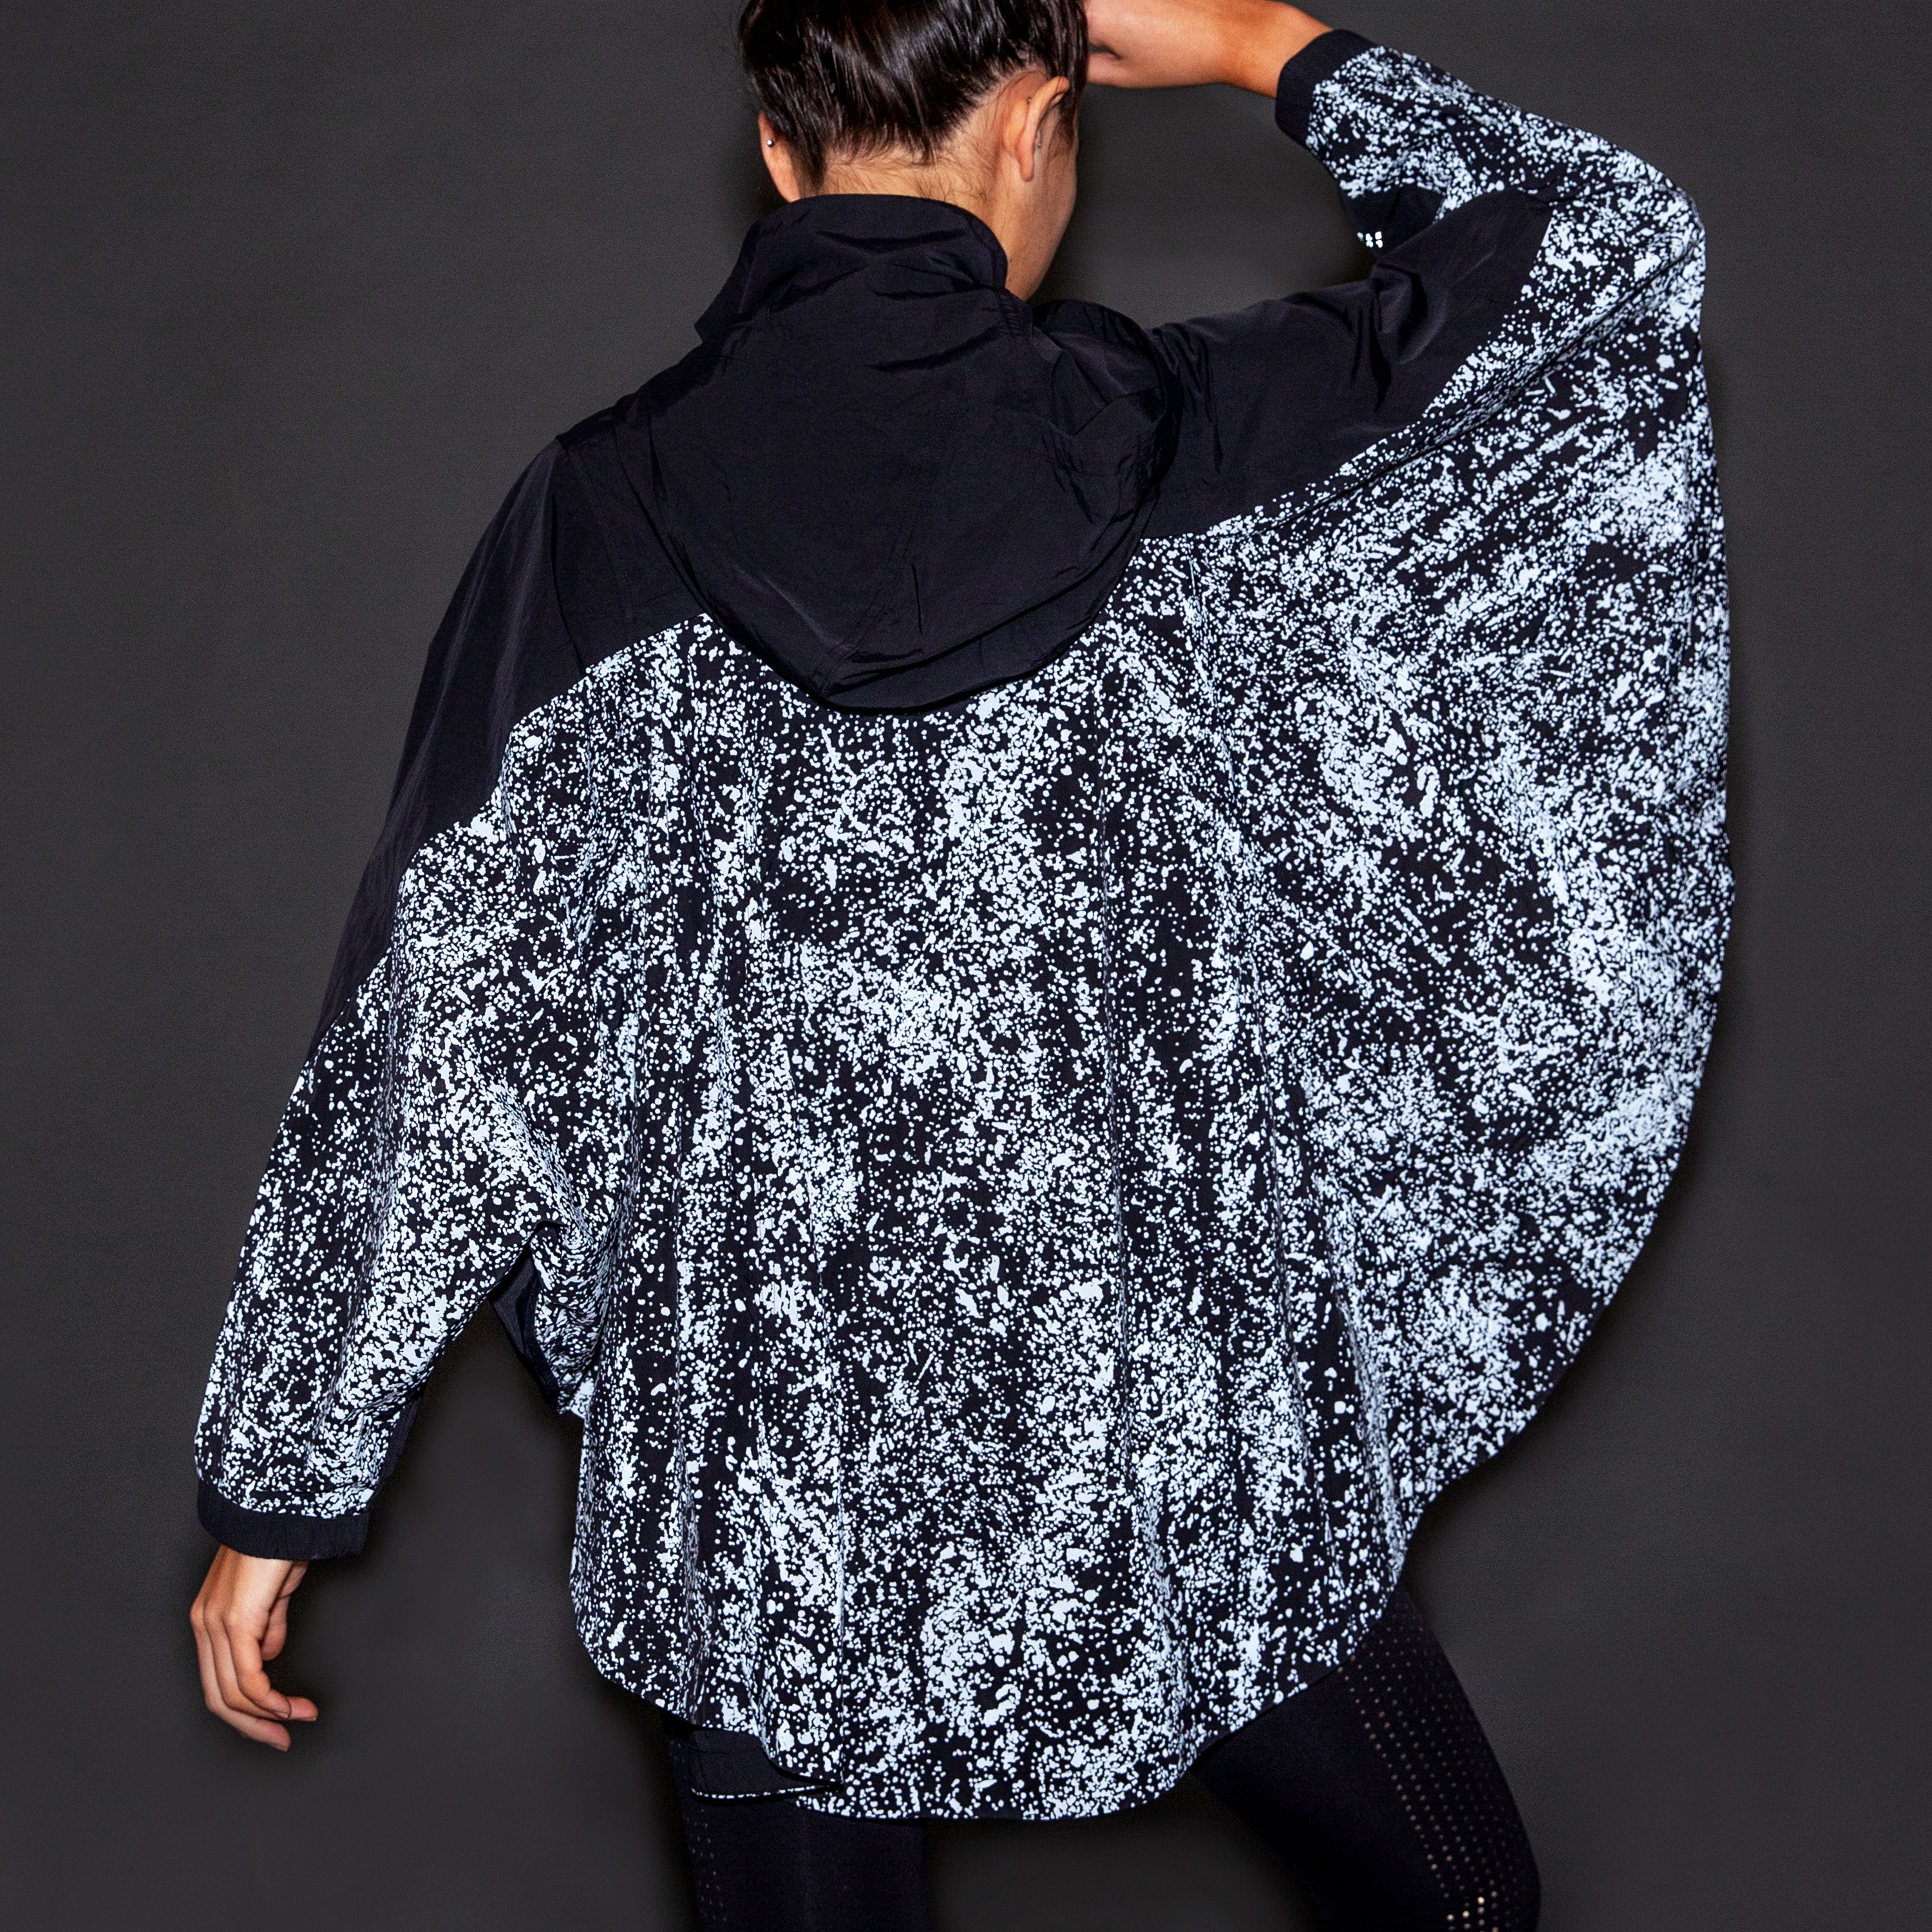 SoulCycle x lululemon Exclusive Ride and Reflect Jacket - SoulCycle Shop